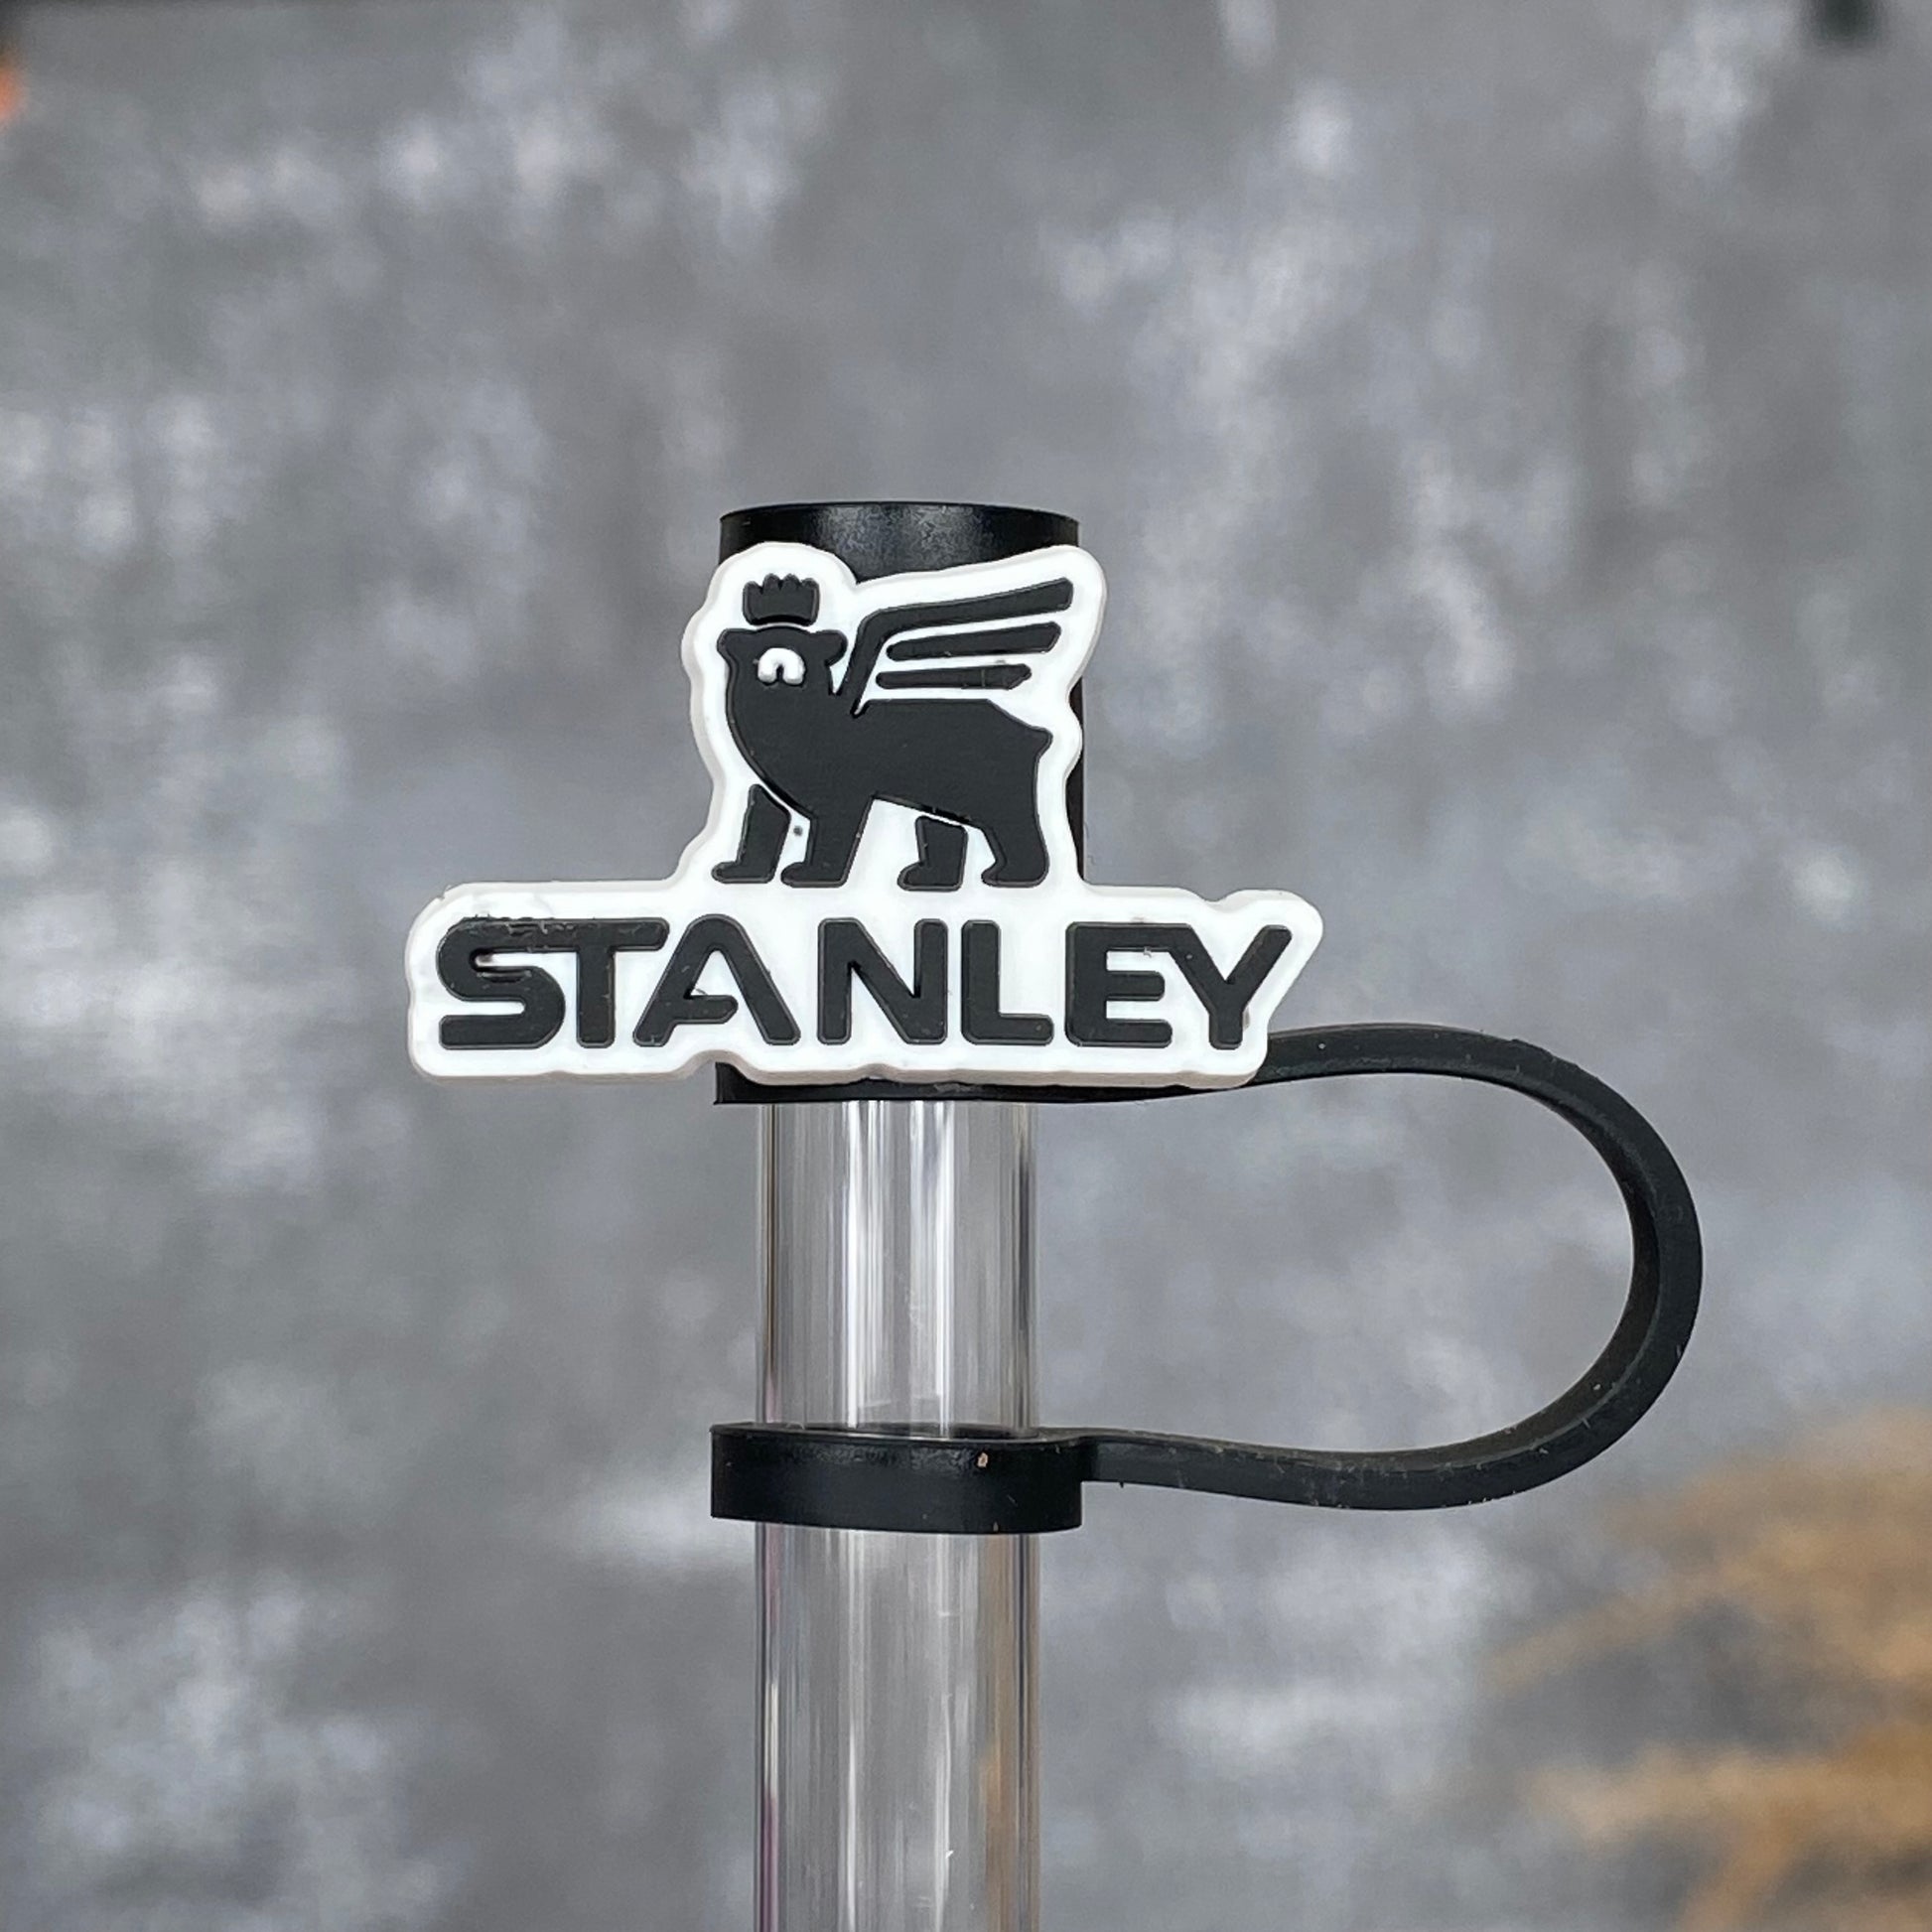 Mini Tumbler Straw Toppers/ Stanley Cup Straw Topper/ Straw Cover 10mm  Straws ONLY 